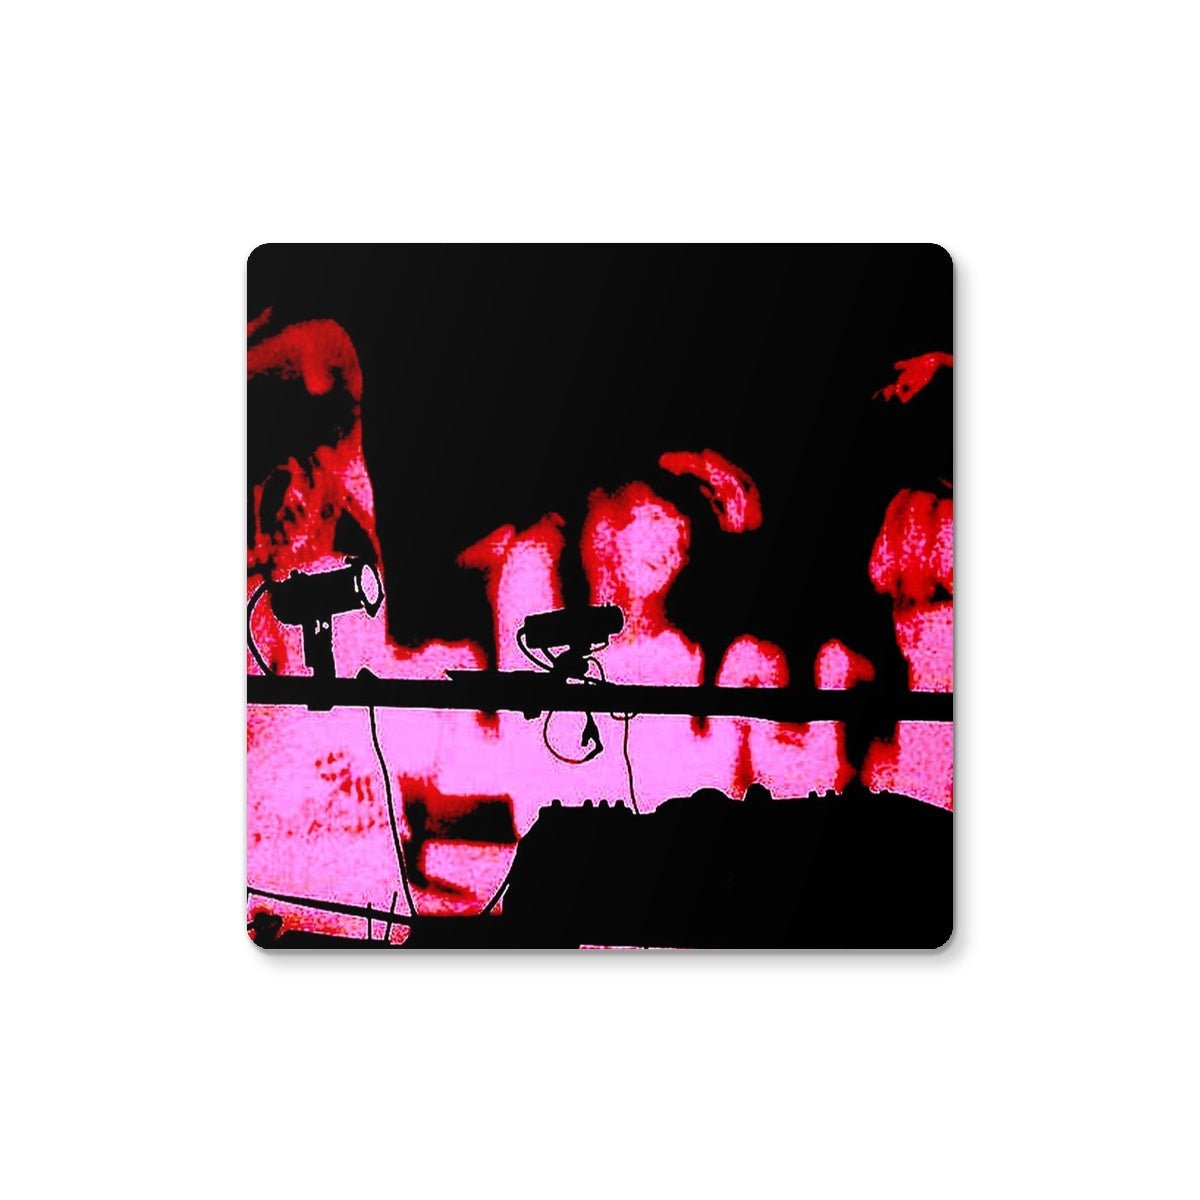 Dancing With The Devils Art Gifts Coaster-Coasters-Abstract & Impressionistic Art Gallery-6 Coasters-Paintings, Prints, Homeware, Art Gifts From Scotland By Scottish Artist Kevin Hunter